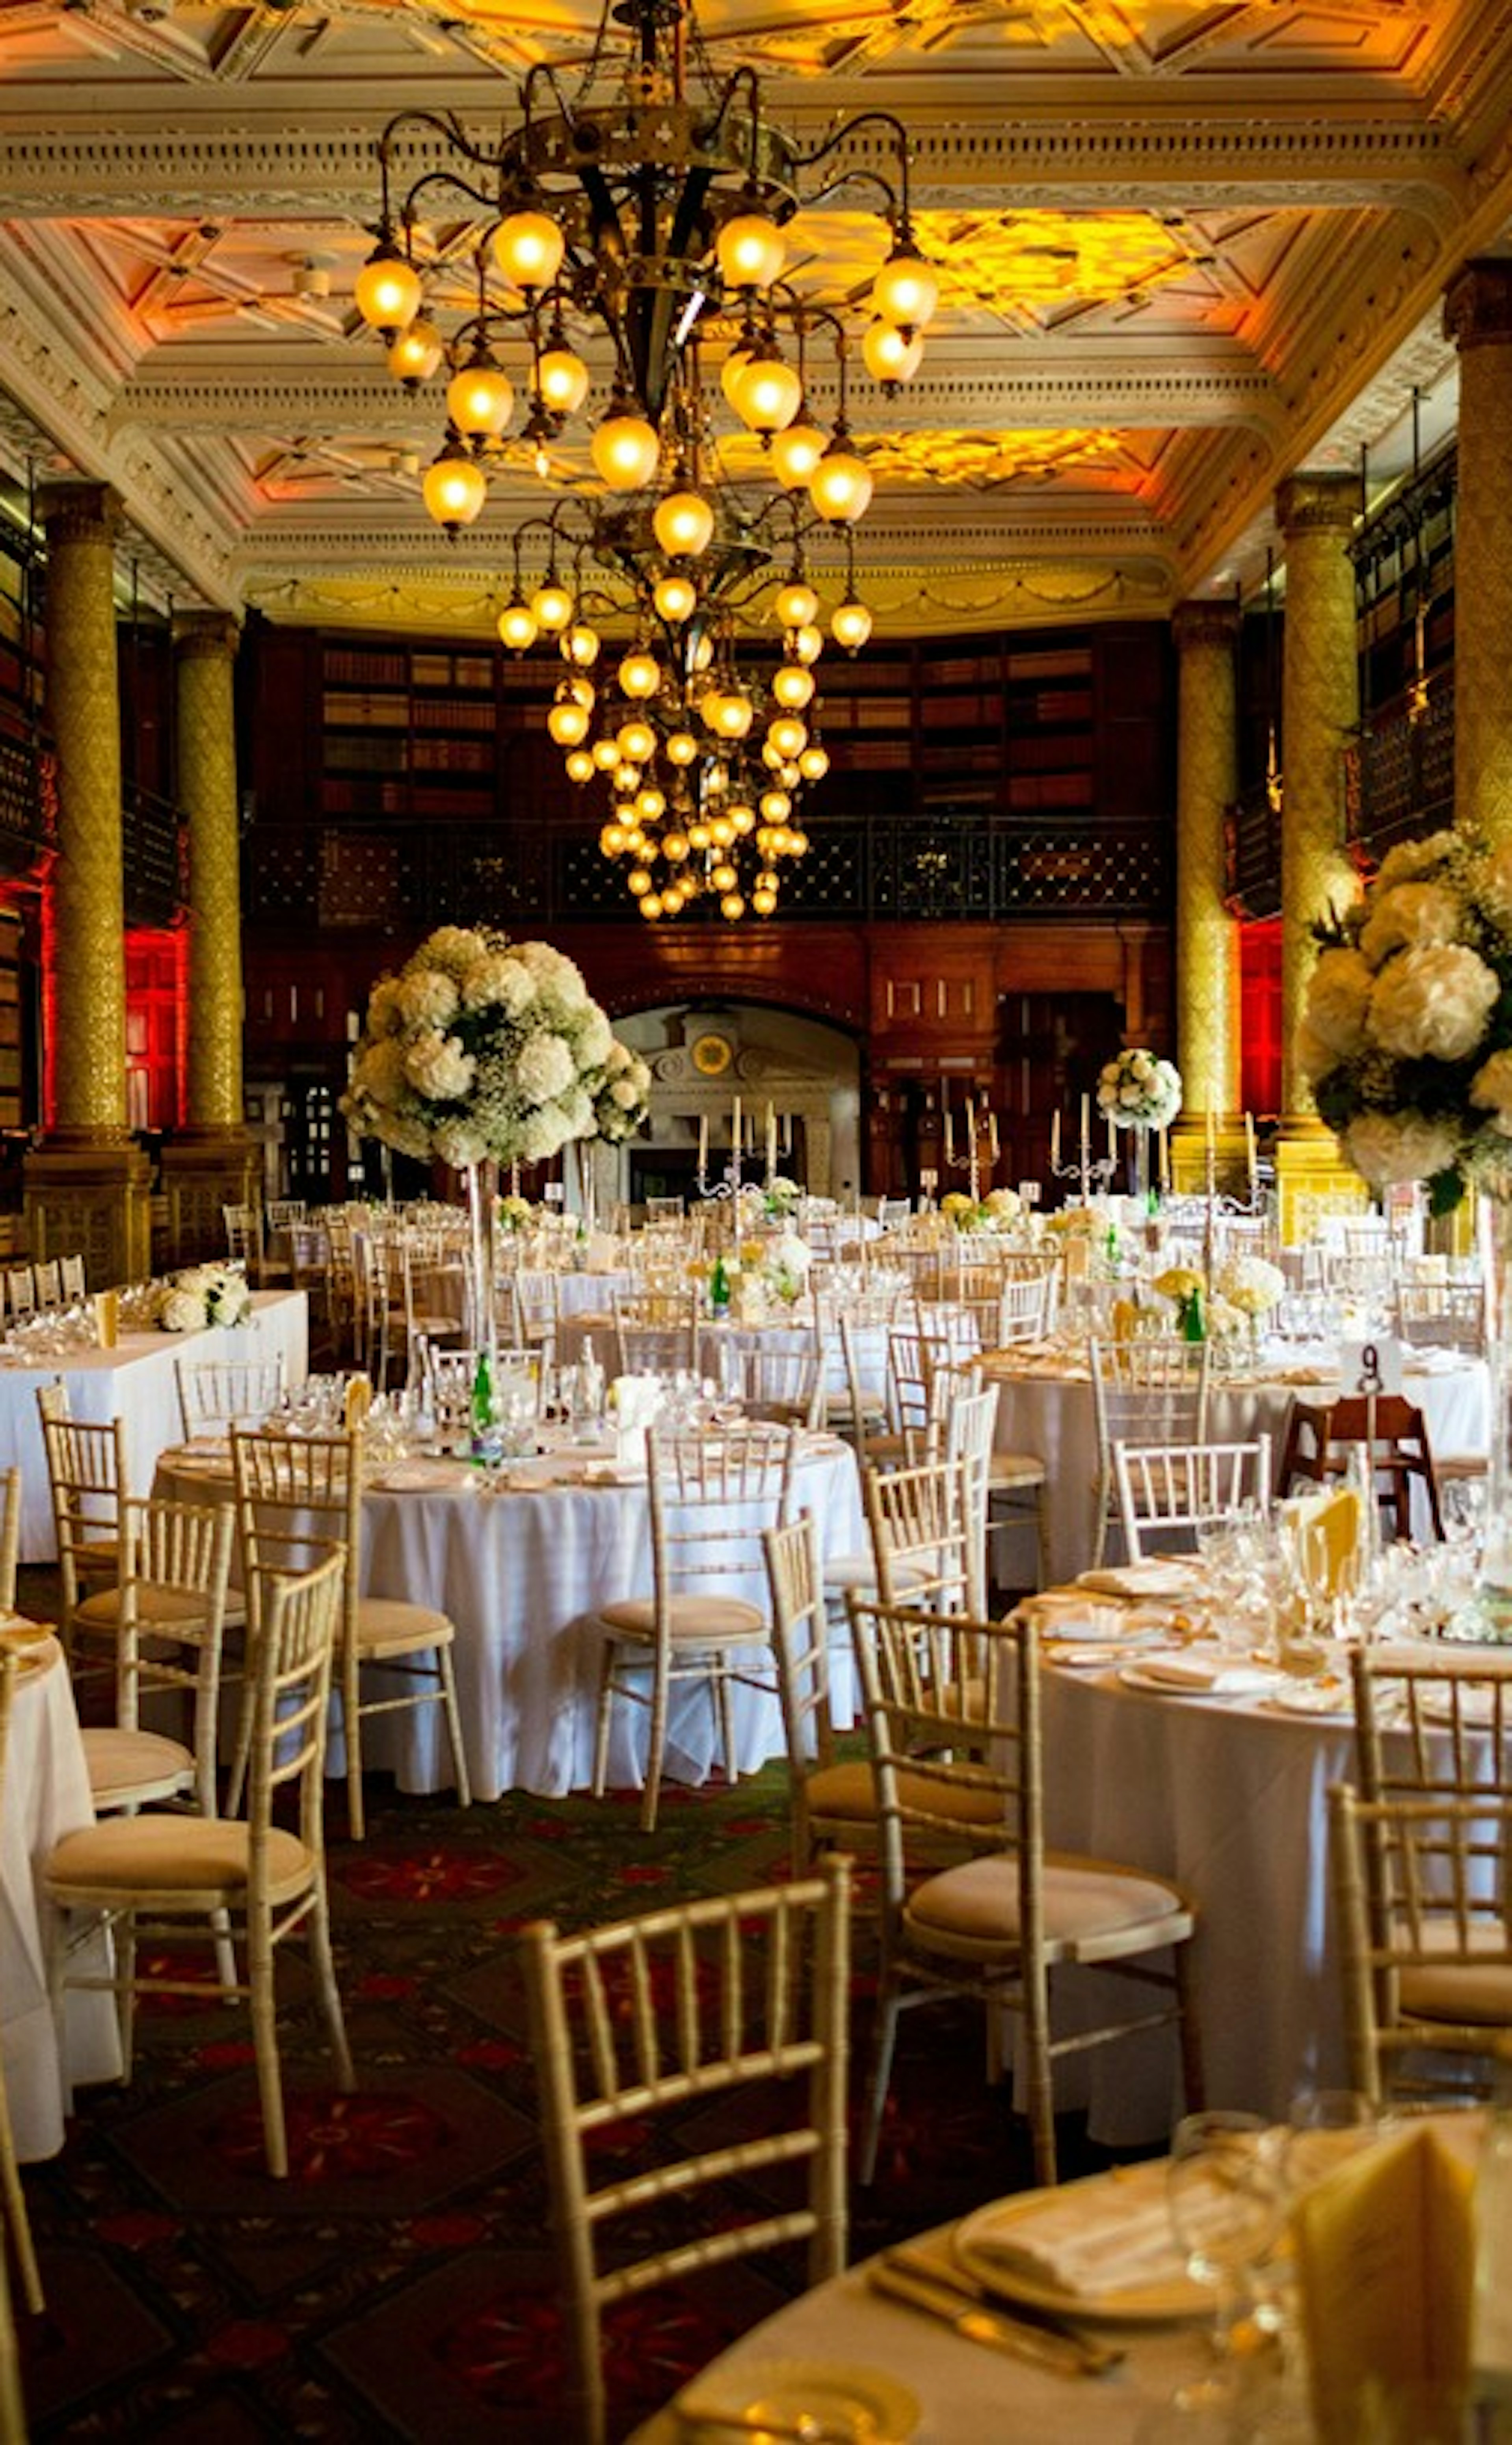 Luxury Wedding Venues - The Royal Horseguards Hotel and One Whitehall Place